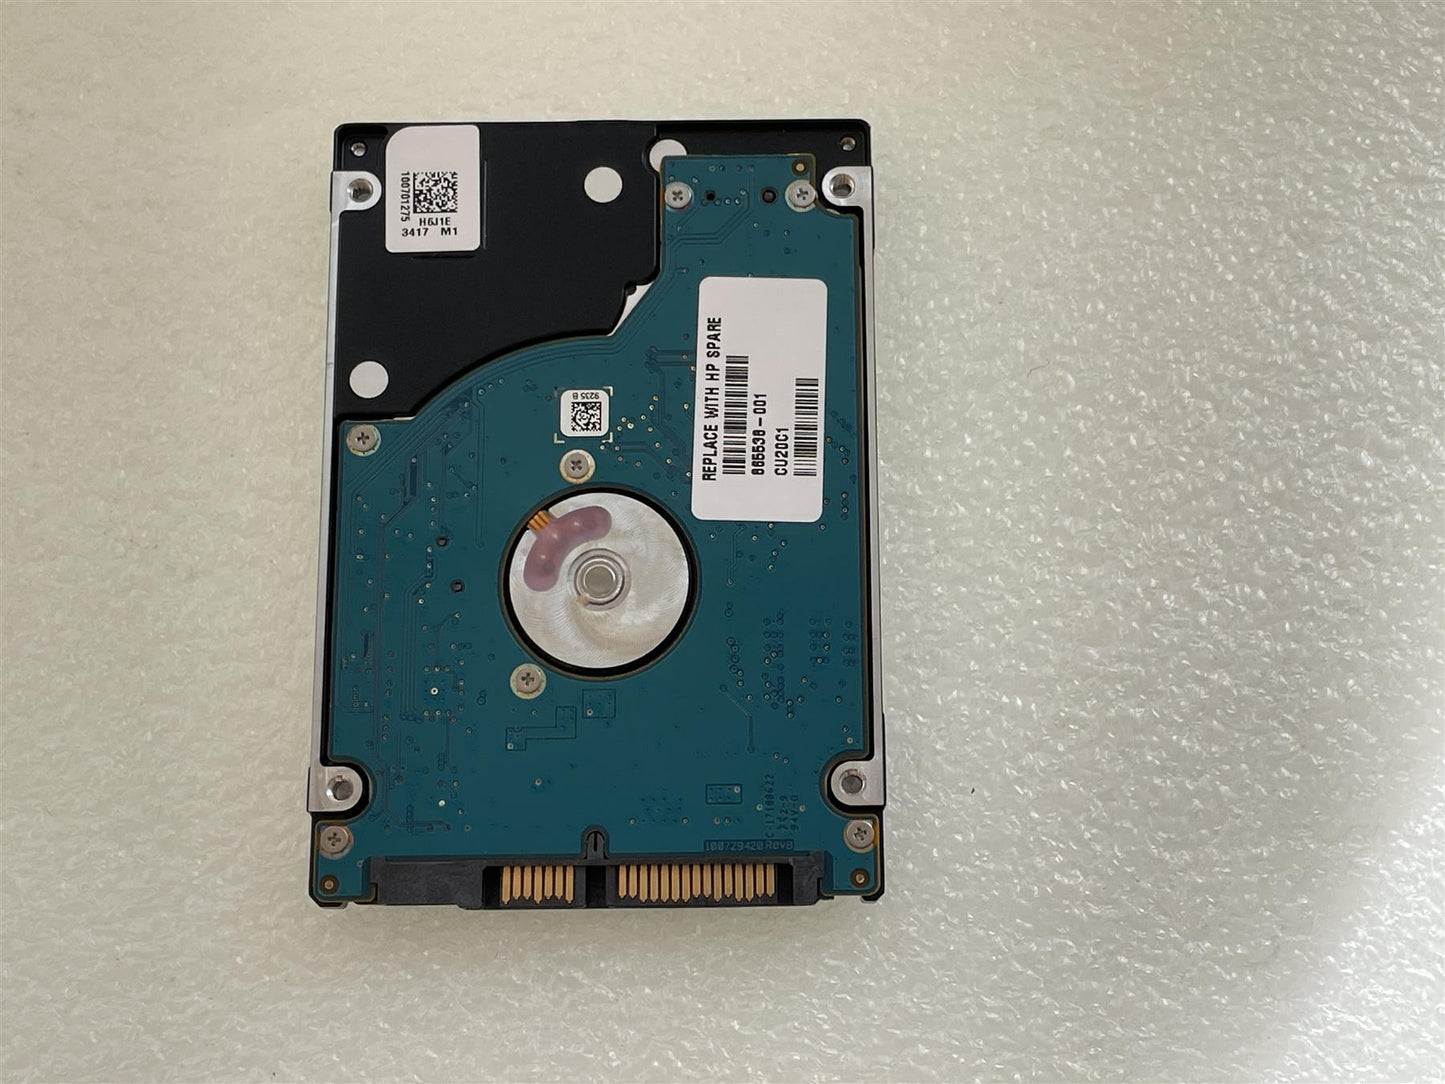 For HP 865538-001 Seagate 500GB ST500LM023 SATA 2.5 inch HDD Hard Disk Drive NEW